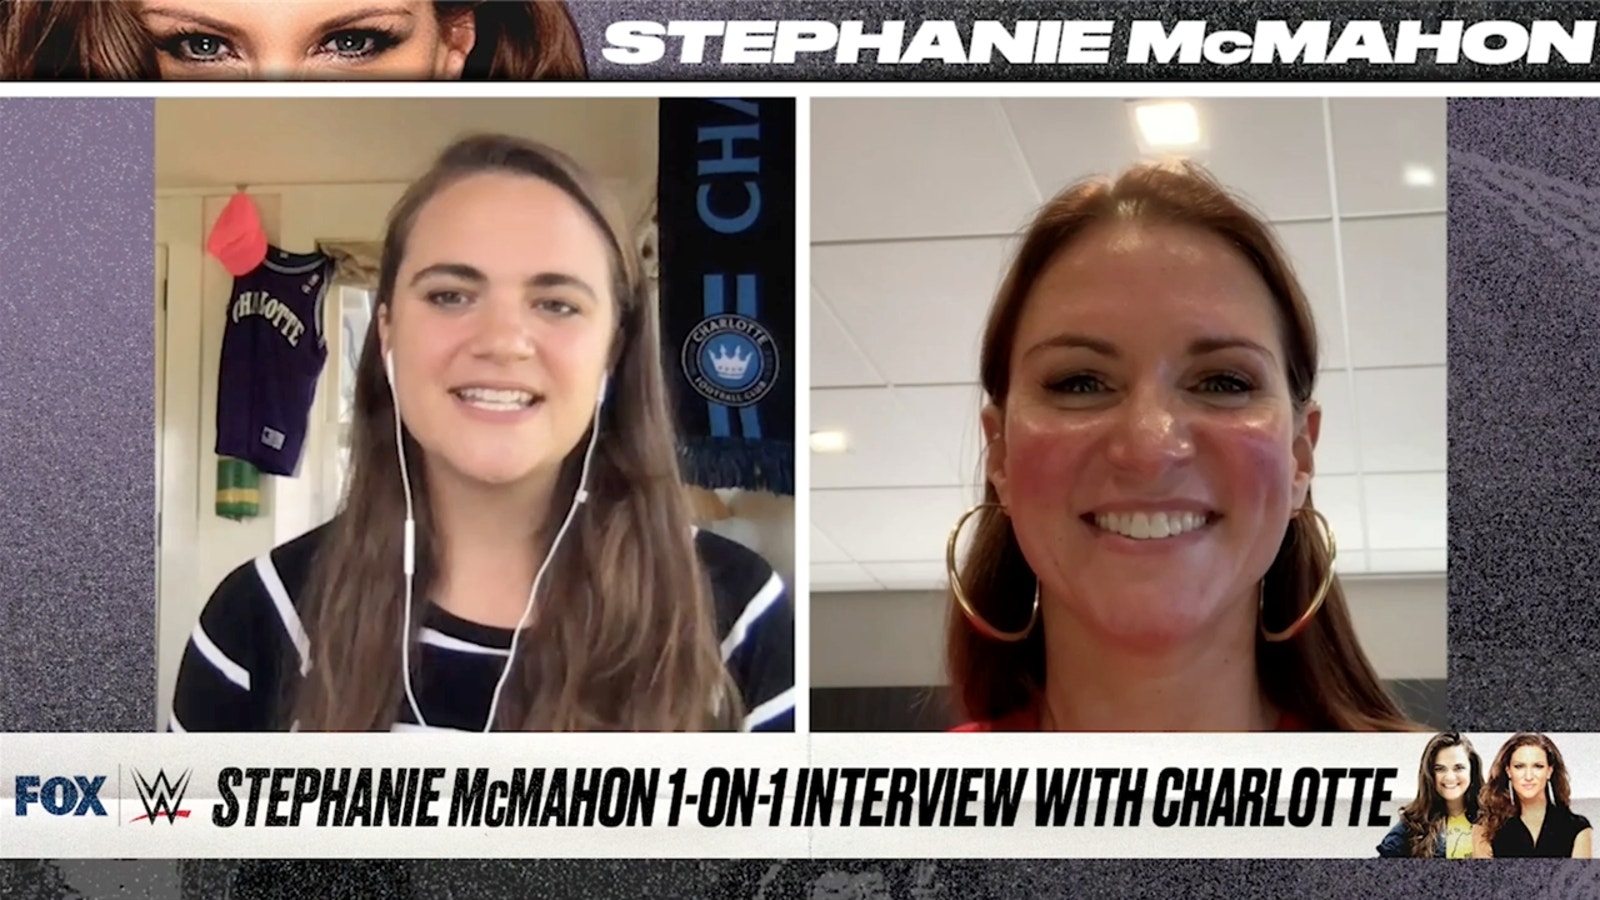 Stephanie McMahon: 20th anniversary of title match, Future of Women's Evolution | Charlotte Wilder (Exclusive 1-on-1)